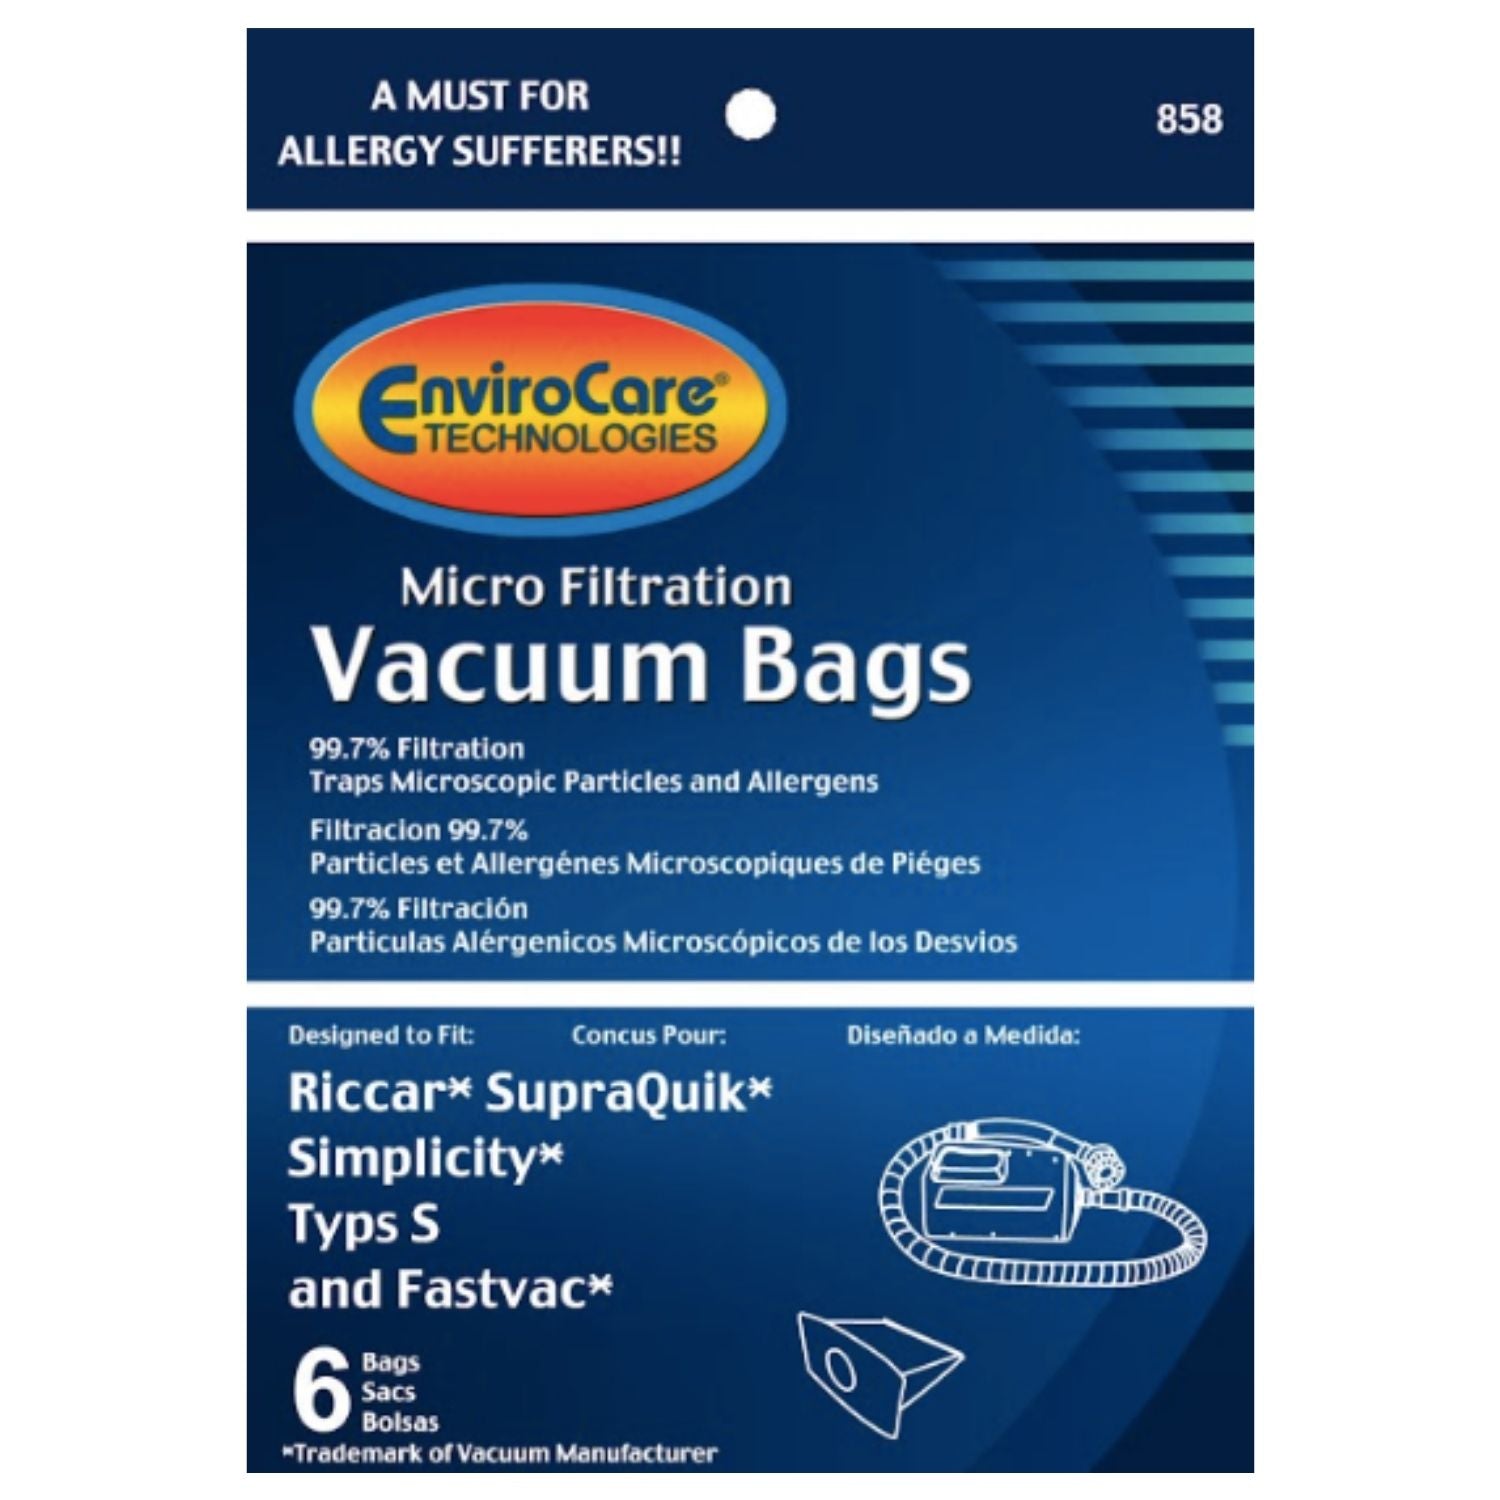 EnviroCare Riccar SupraQuick, Simplicity Type S and Fastvac Paper Vacuum Bags, (6 Pack)